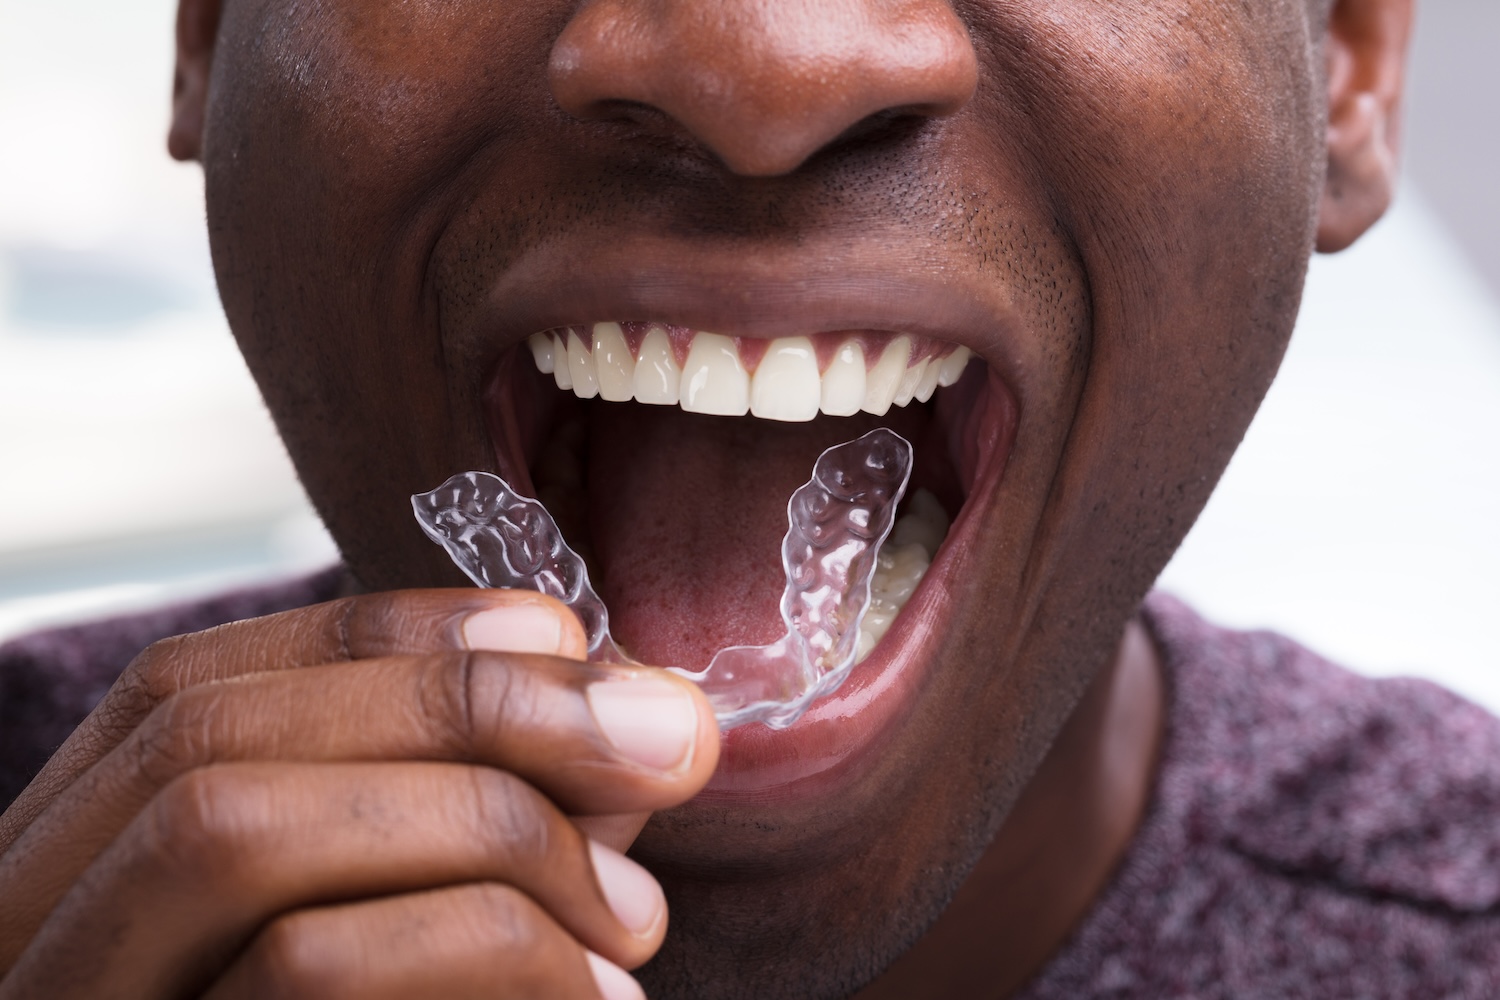 Invisalign aligners, dental hygiene, orthodontic treatment, Gastonia Family Dentistry, clear aligners, aligner care tips, healthy smile, Invisalign cleaning, orthodontic care